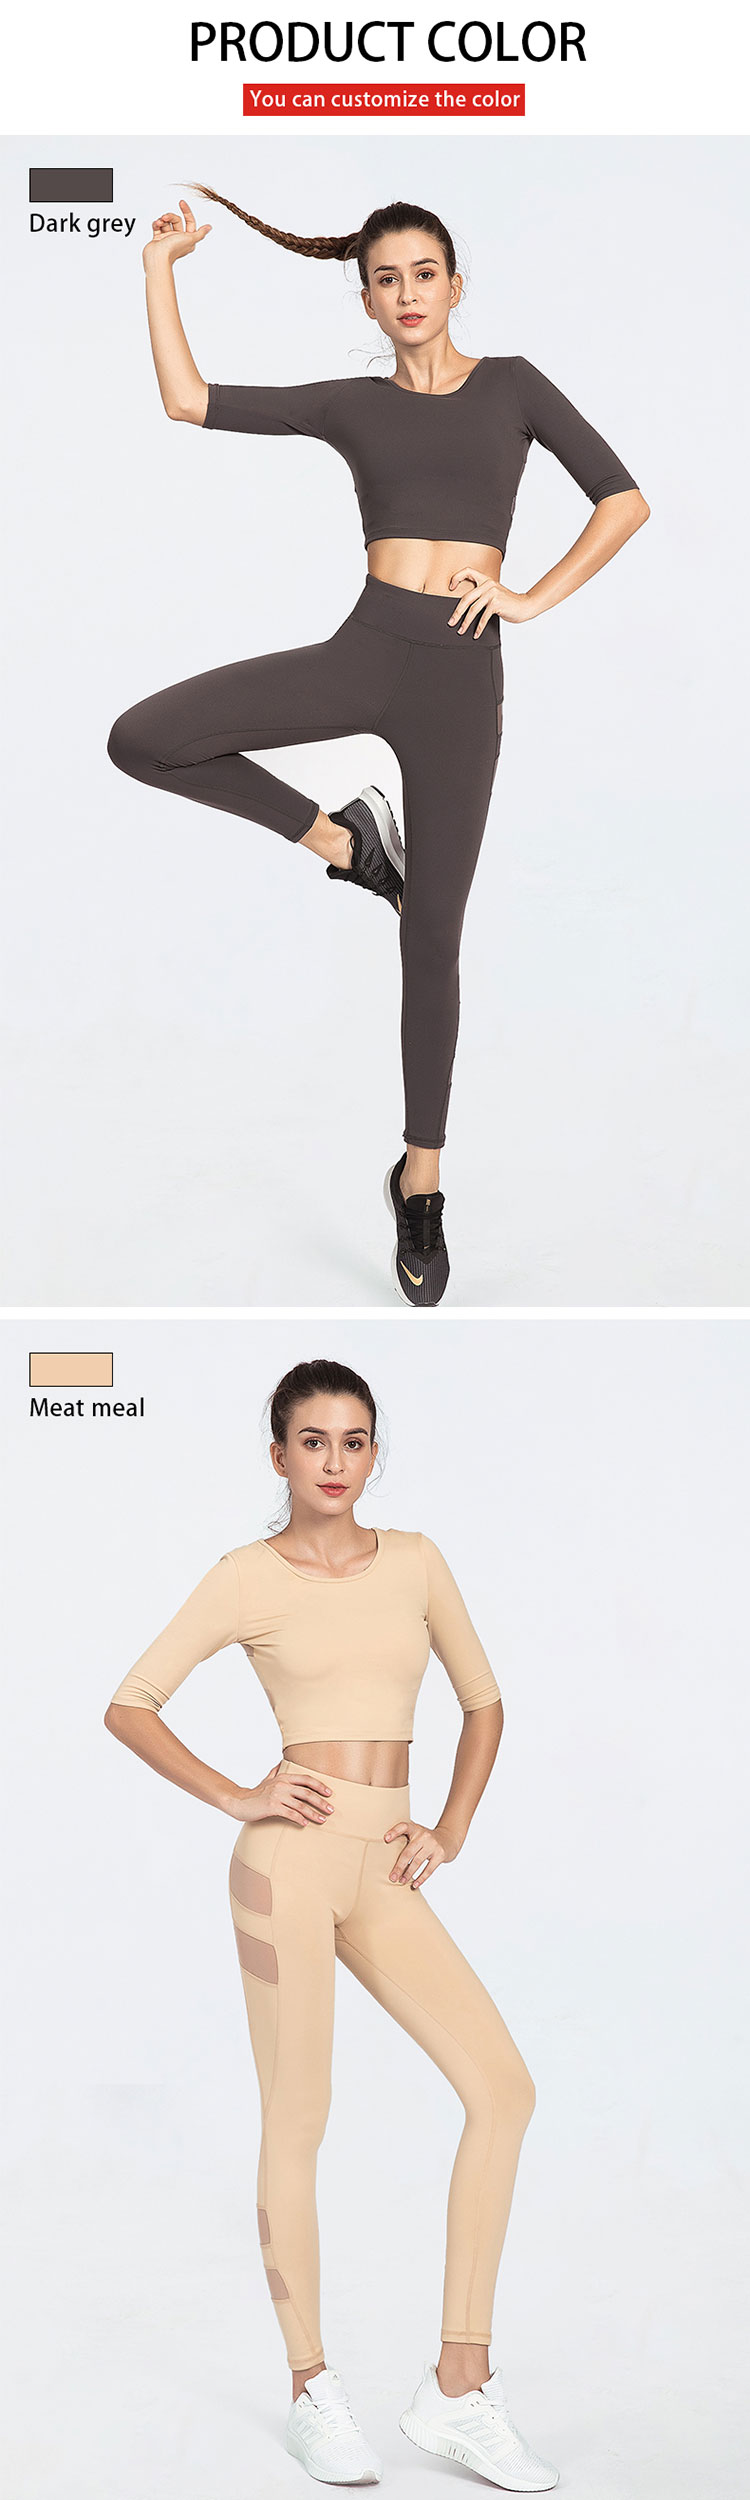 Quality-we-have-produced-yoga-clothes-for-many-big-brands.